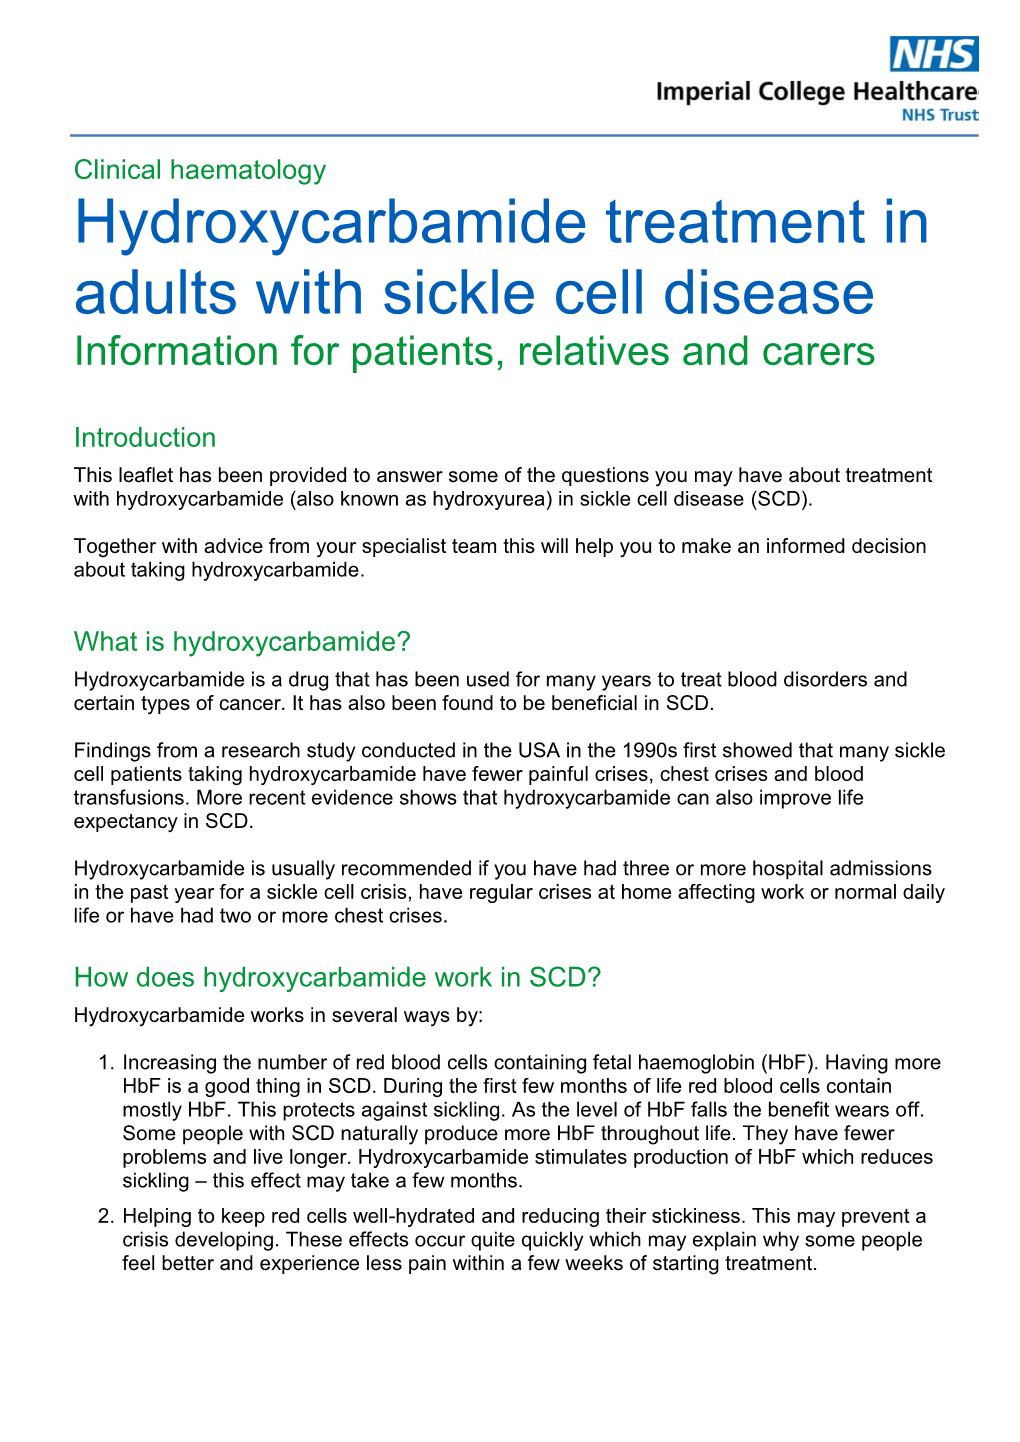 Hydroxycarbamide Treatment in Adults with Sickle Cell Disease (SCD)